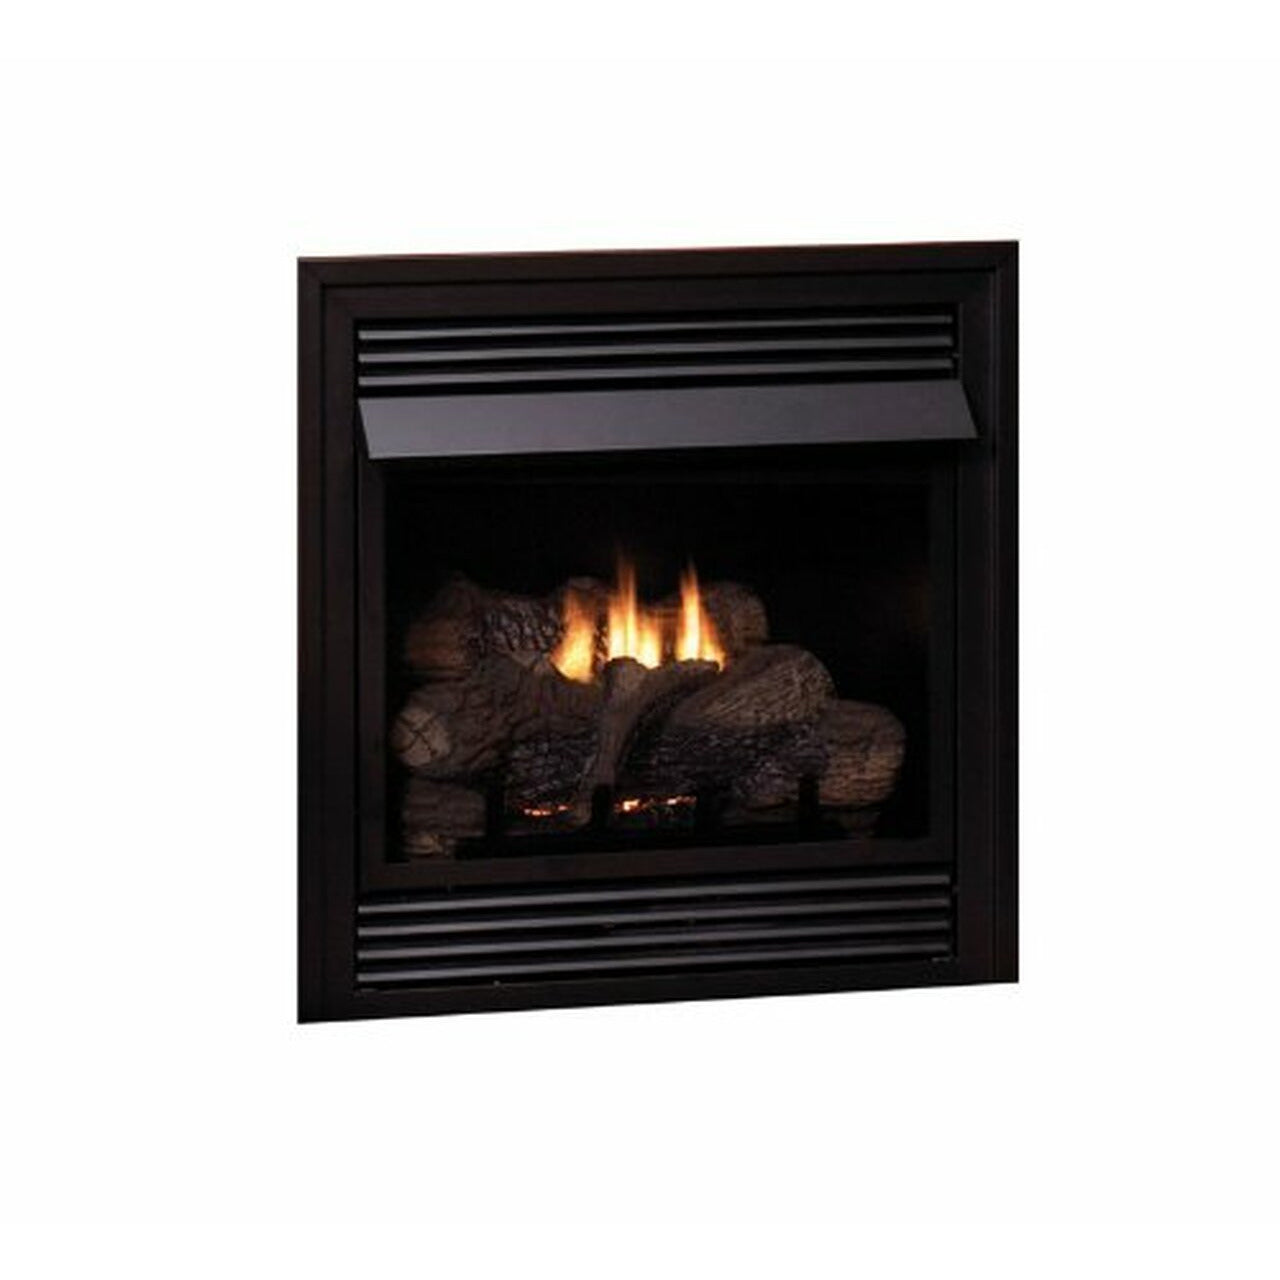 American Hearth 26" Lincoln Deluxe Vent-Free Fireplace with Contour Burner VFD26FP